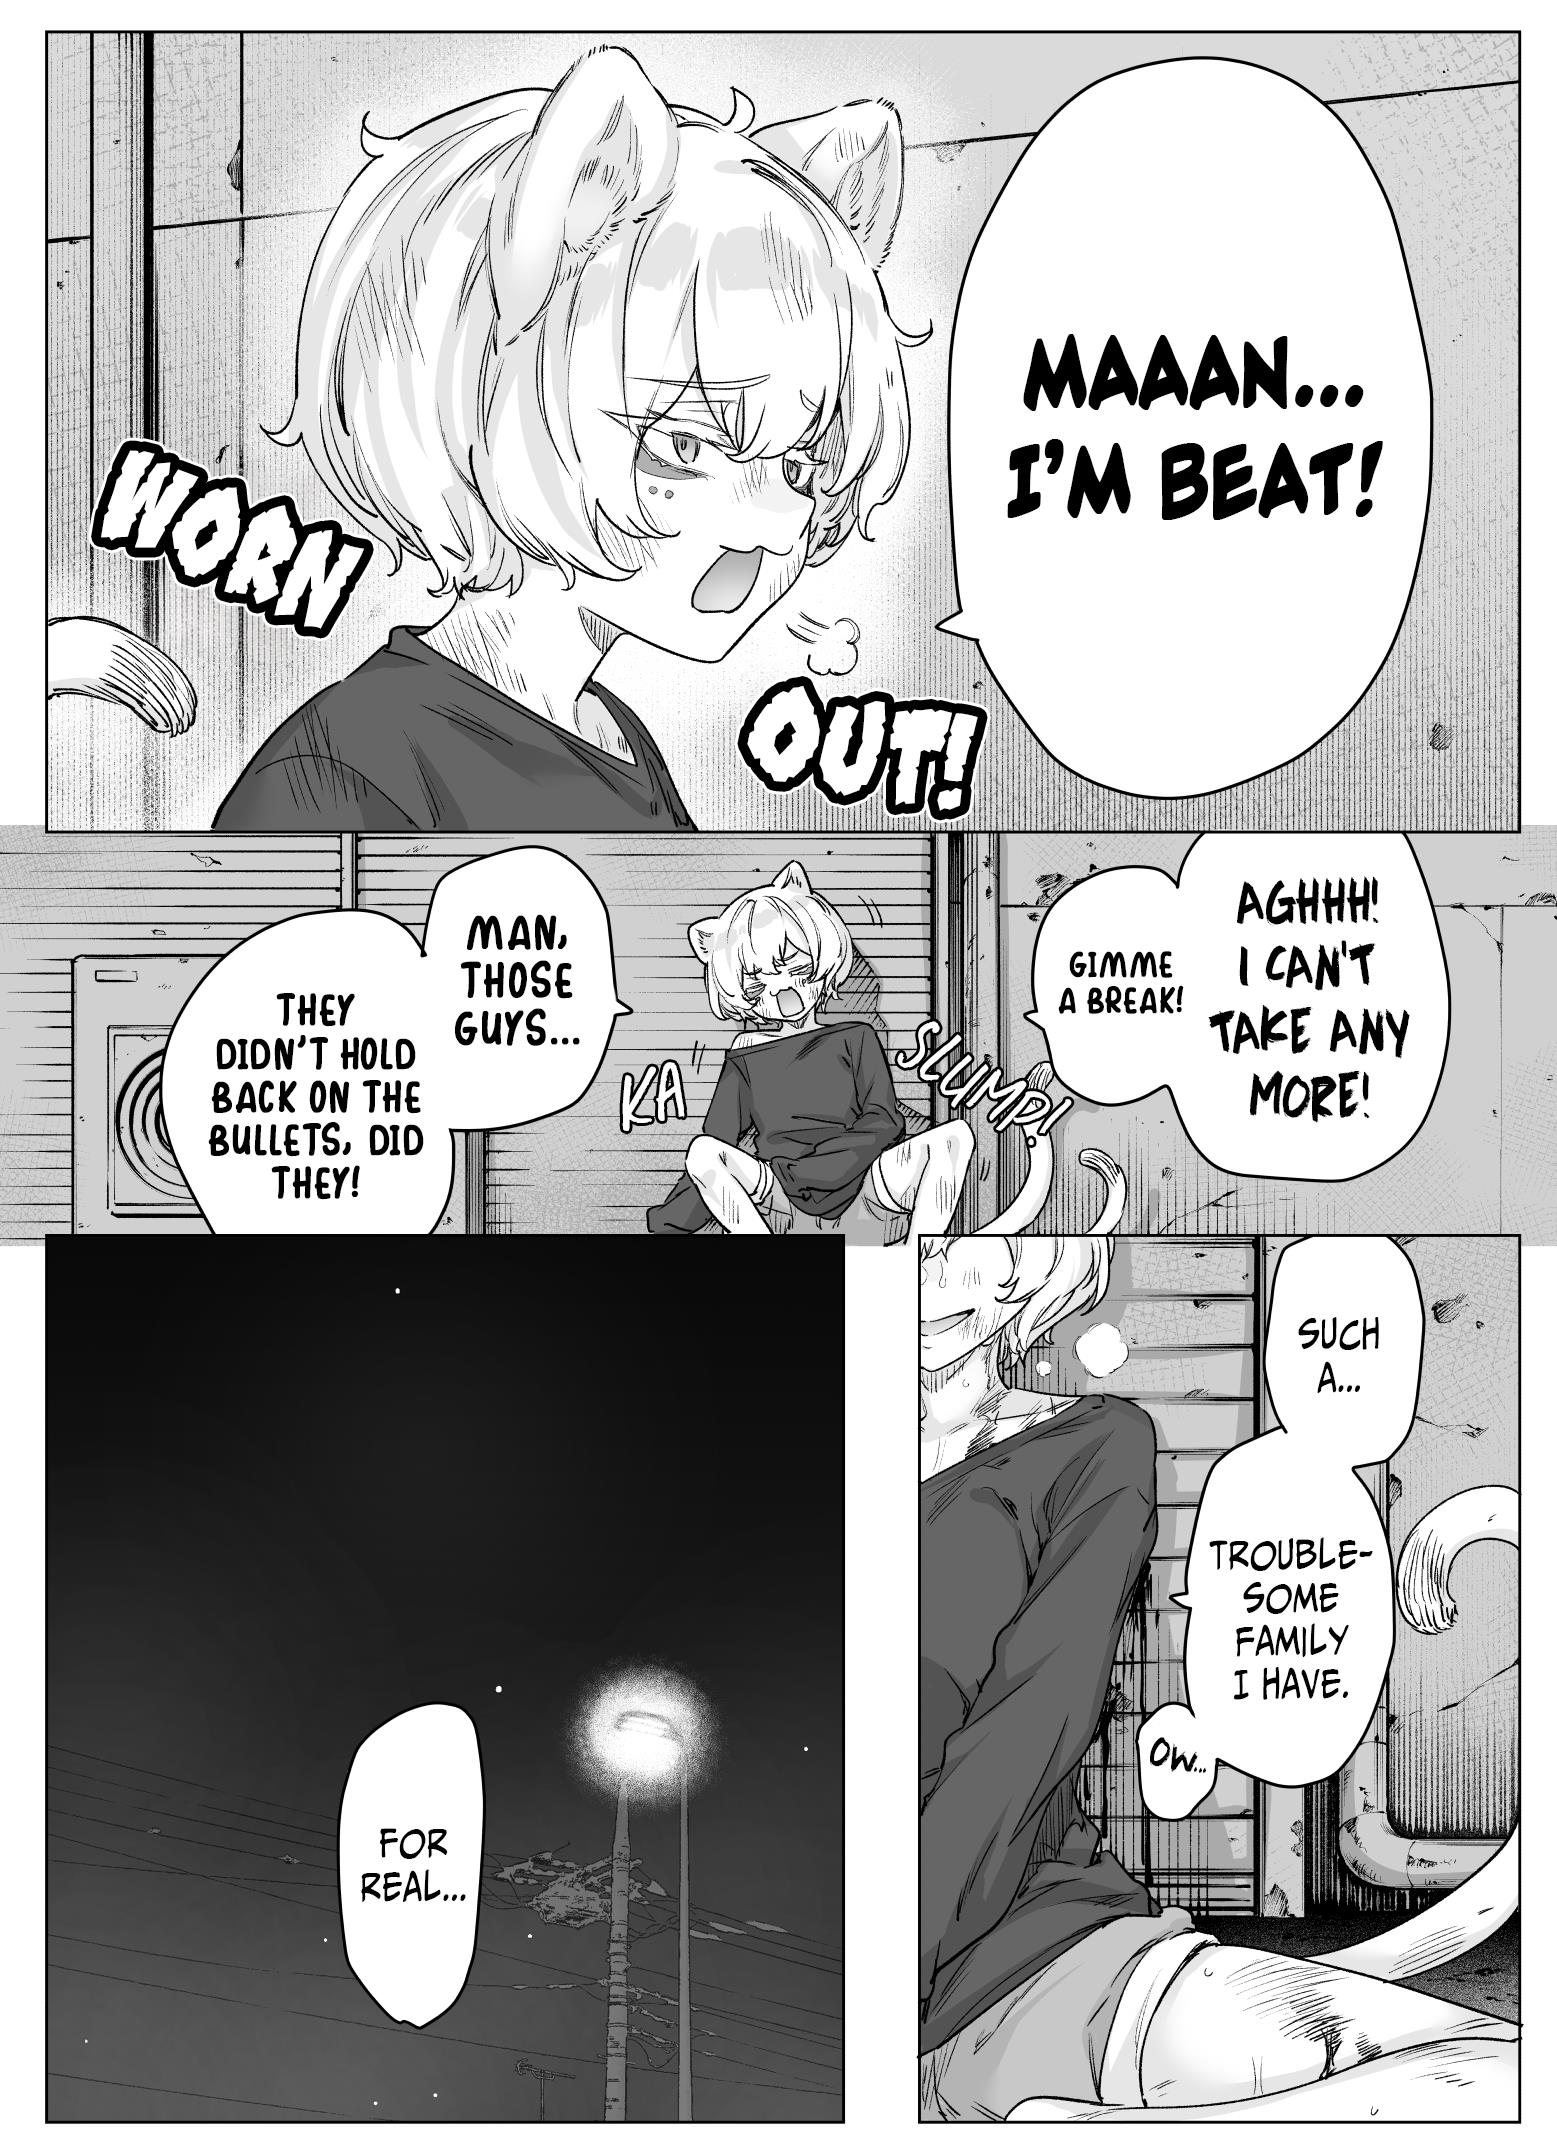 Even Though She's The Losing Heroine, The Bakeneko-Chan Remains Undaunted - Page 3